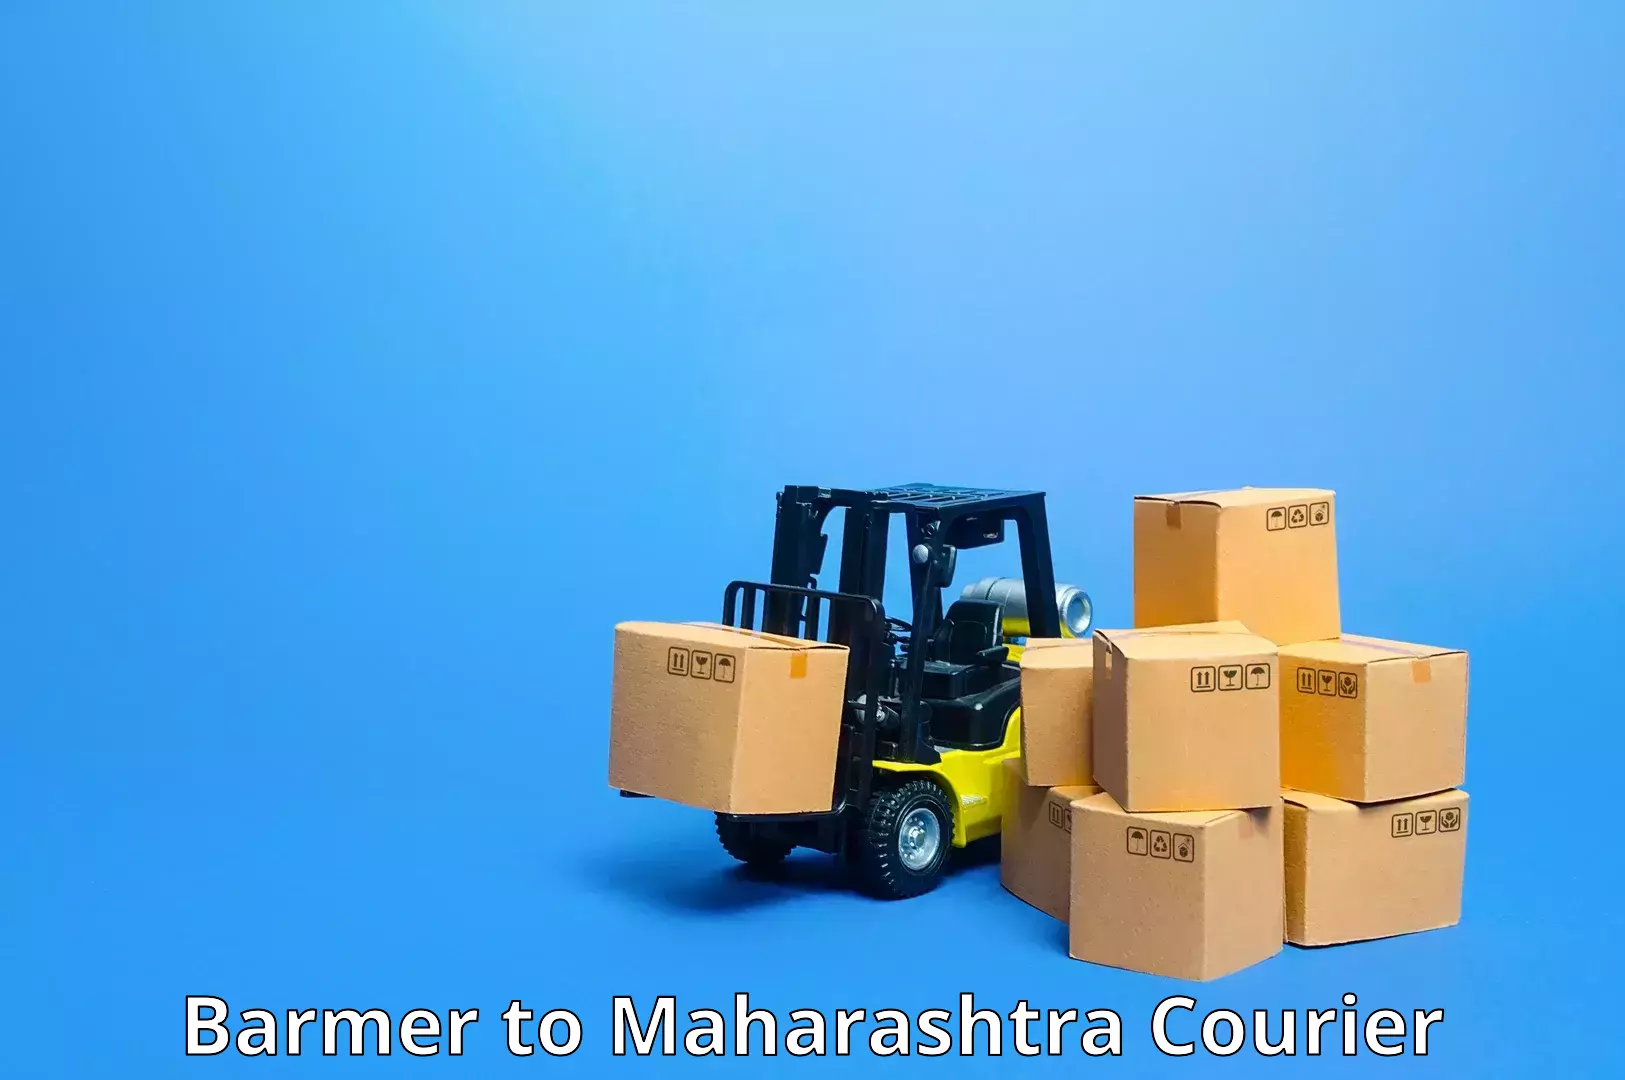 Advanced shipping technology in Barmer to Chakan